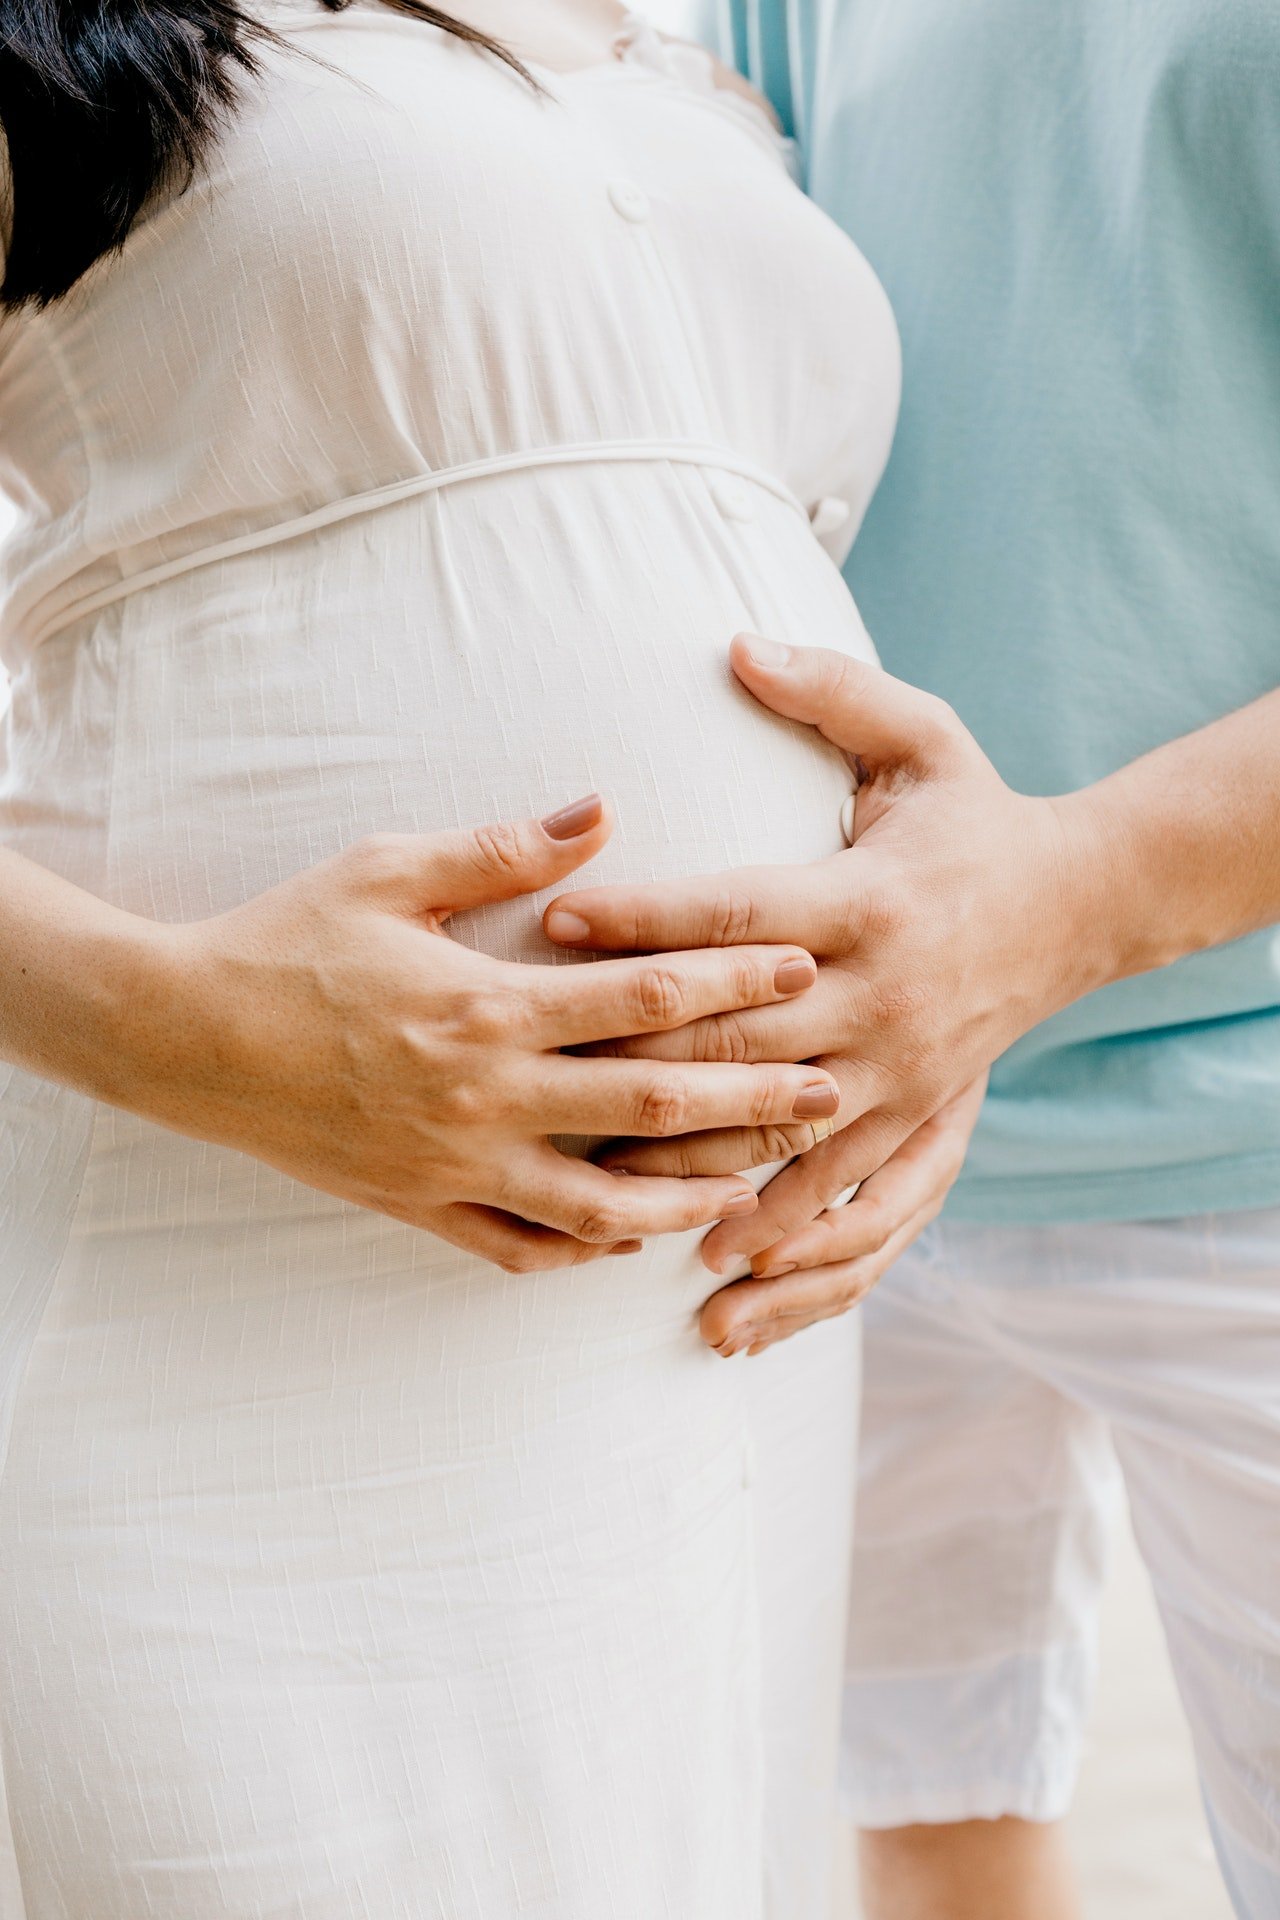 Man and pregnant woman's hands cradling her belly. | Photo: Pexels